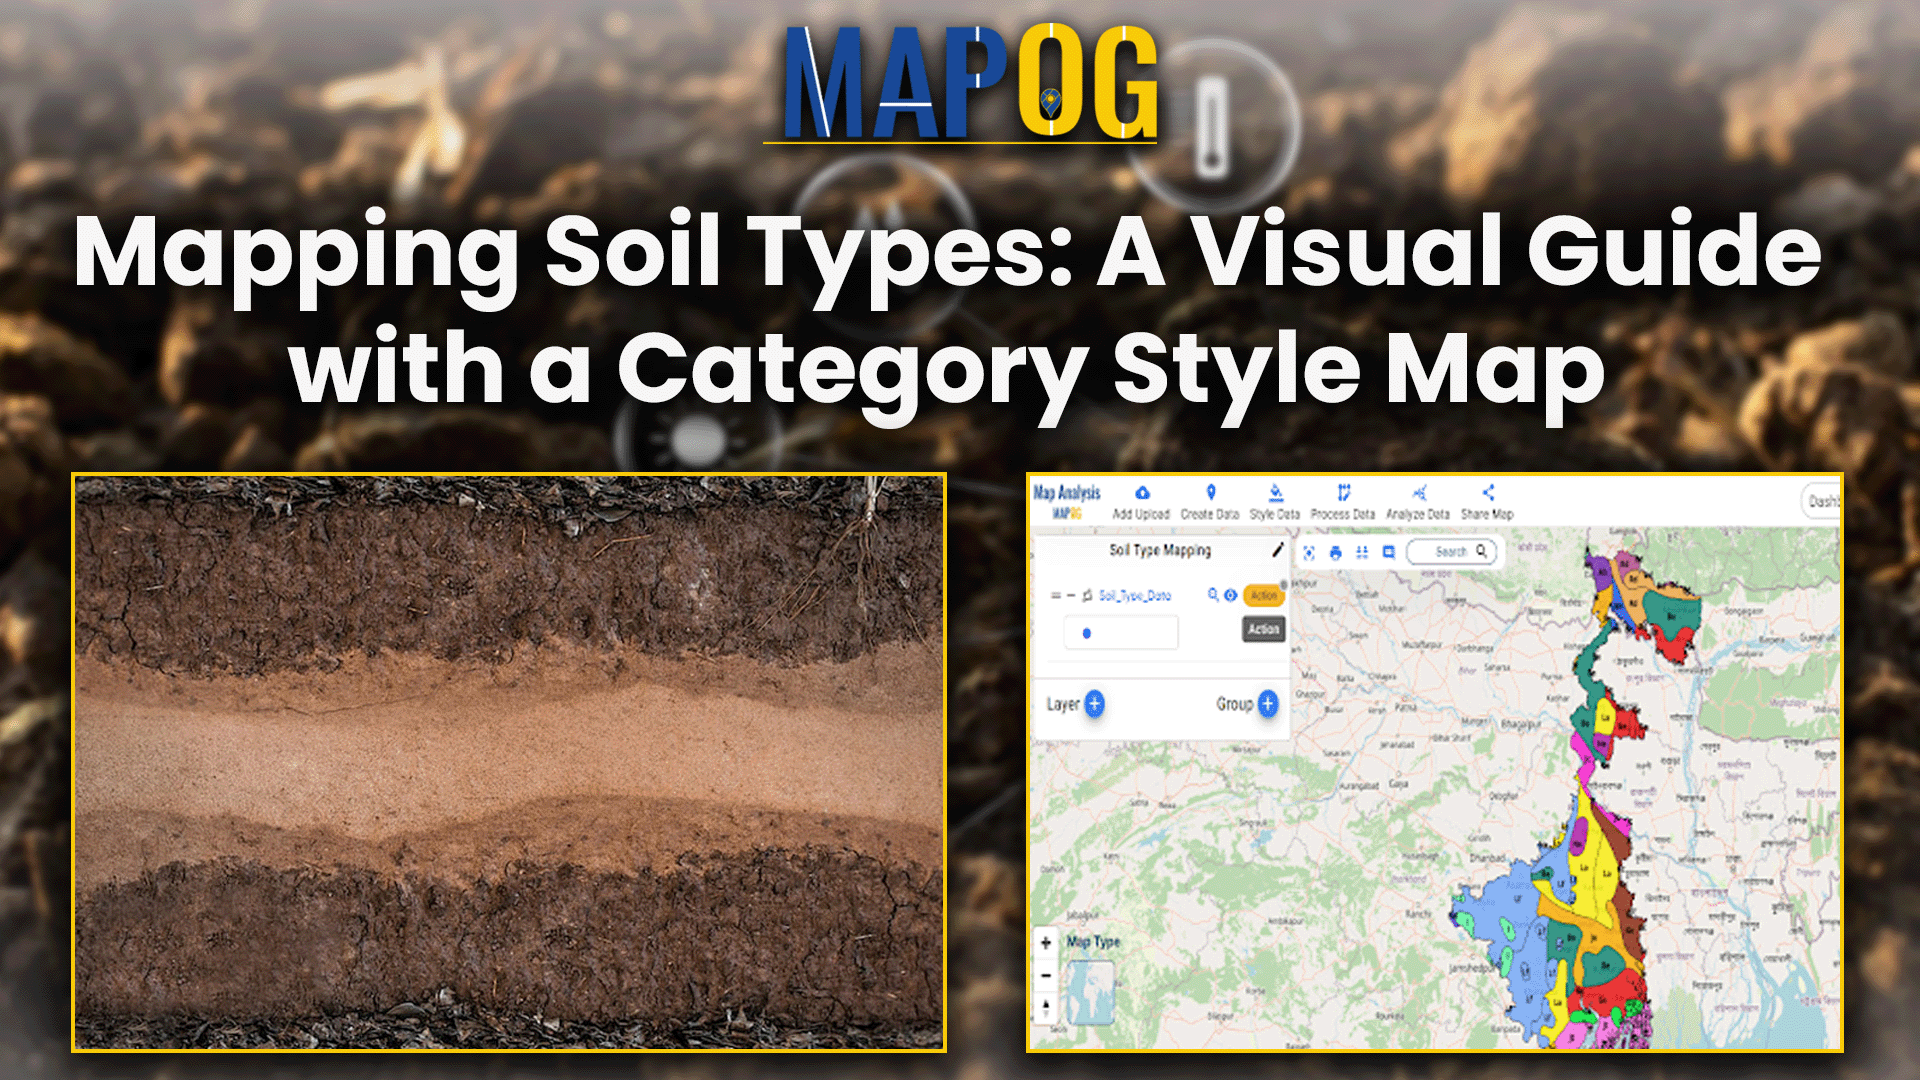 Mapping Soil Types: A Visual Guide with a Category Style Map